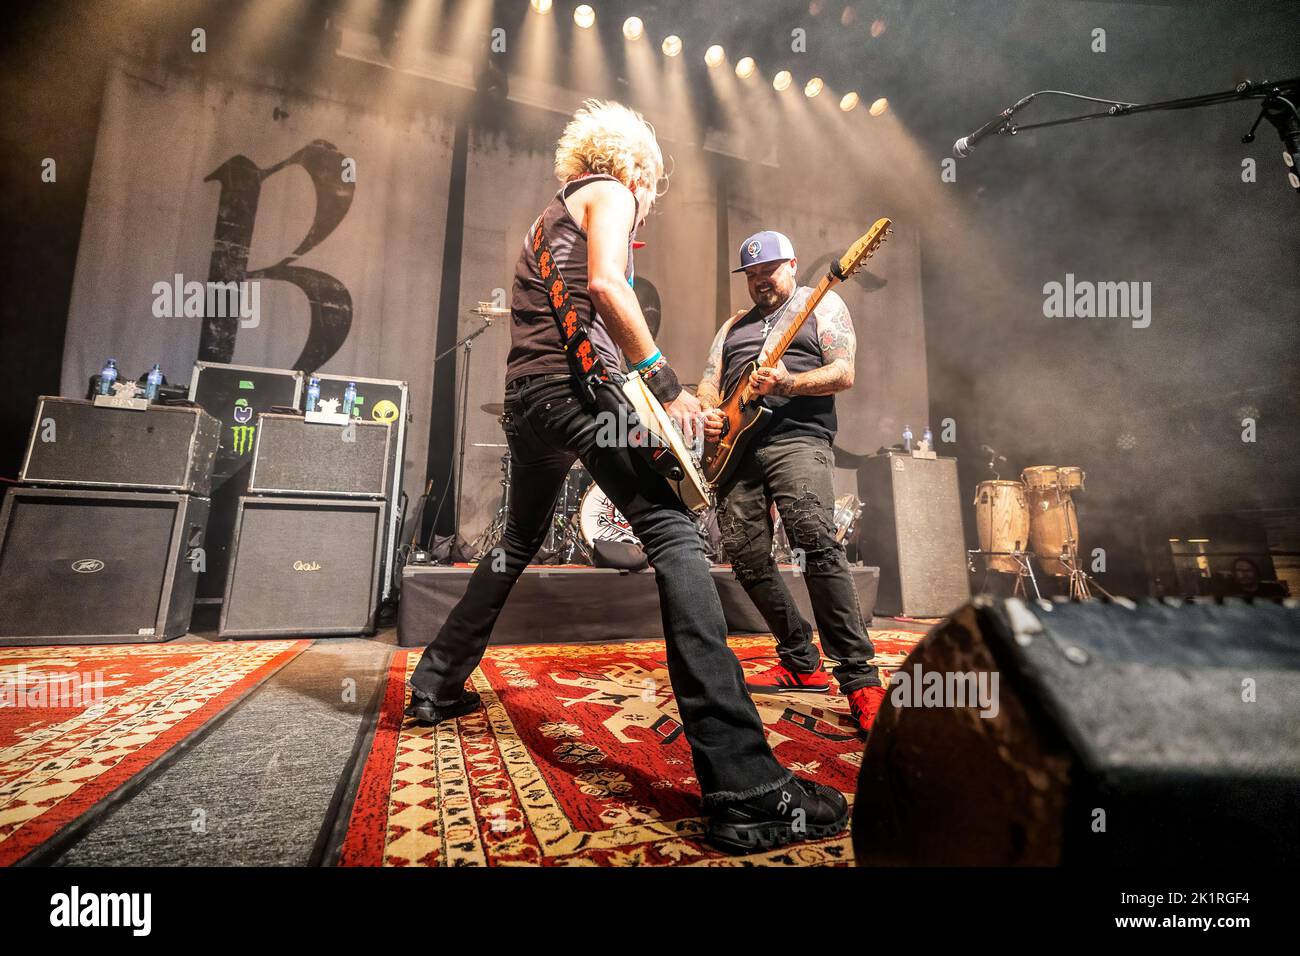 Oslo, Norway. 17th, September 2022. The American rock band Black Stone Cherry performs a live concert at Rockefeller in Oslo. Here vocalist and guitarist Chris Robertson (R) is seen live on stage with guitarist Ben Wells (L). (Photo credit: Gonzales Photo - Terje Dokken). Stock Photo